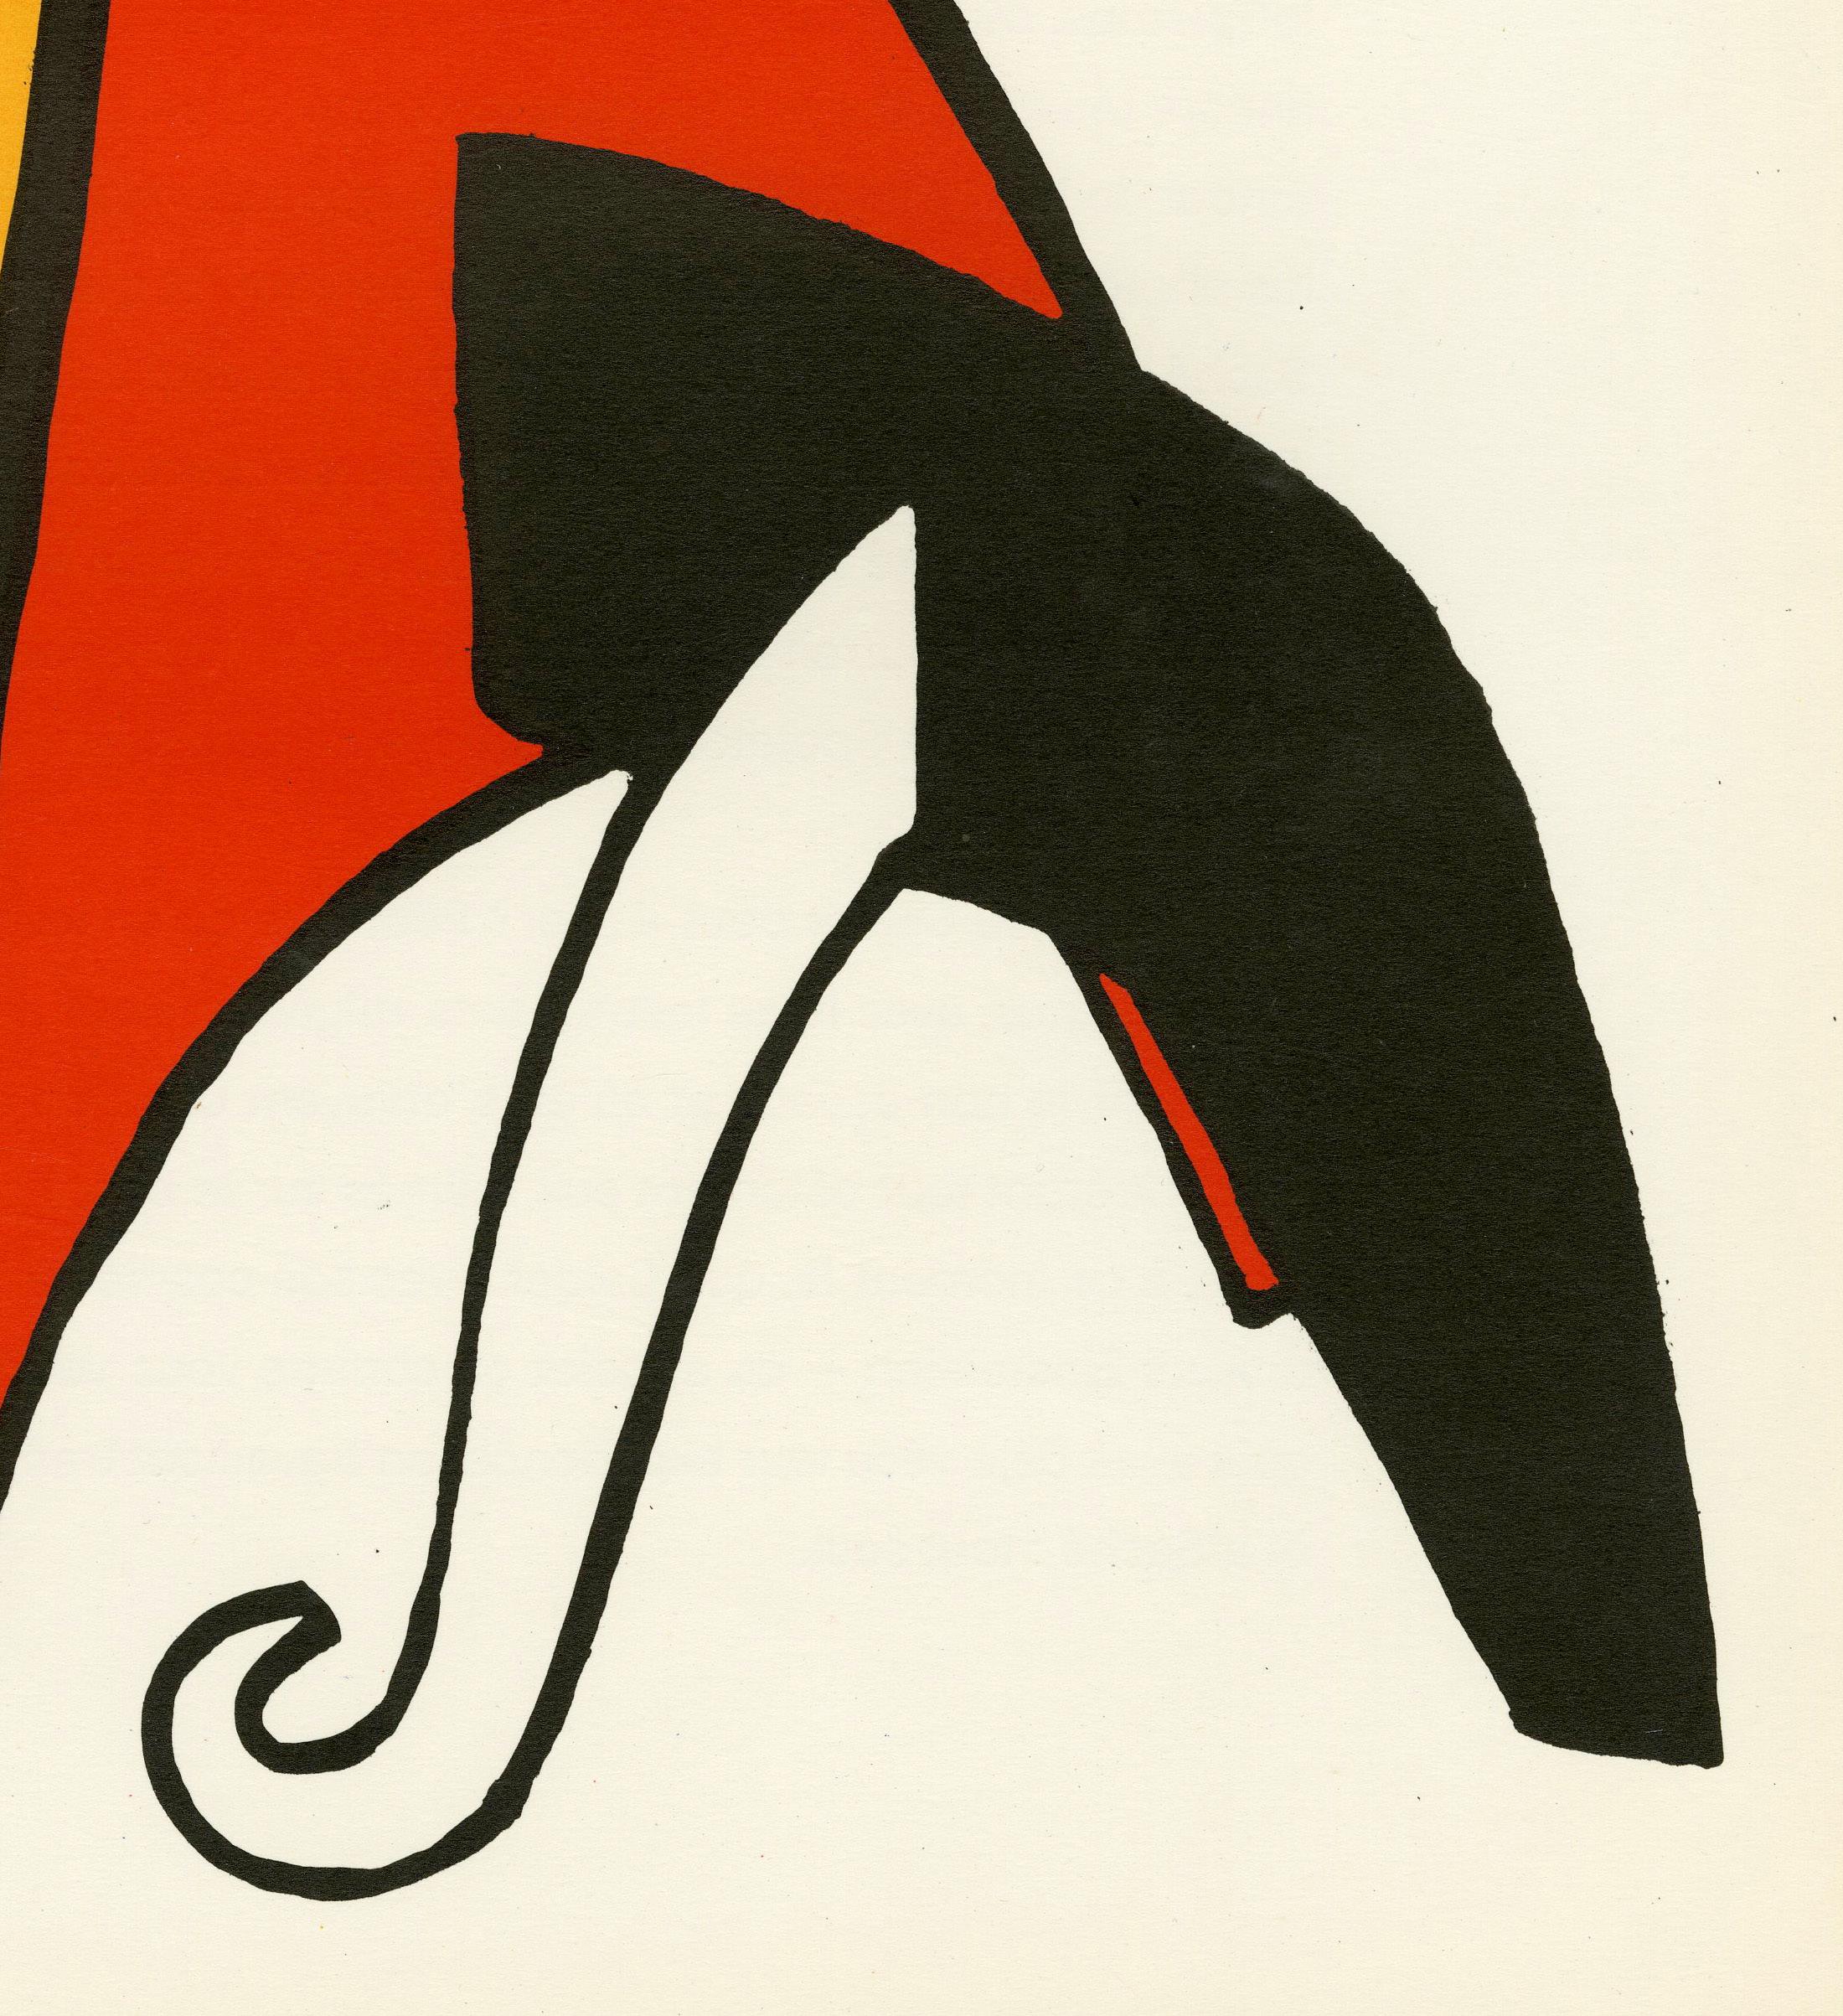 Untitled (Plate 4) DLM - Abstract Print by Alexander Calder